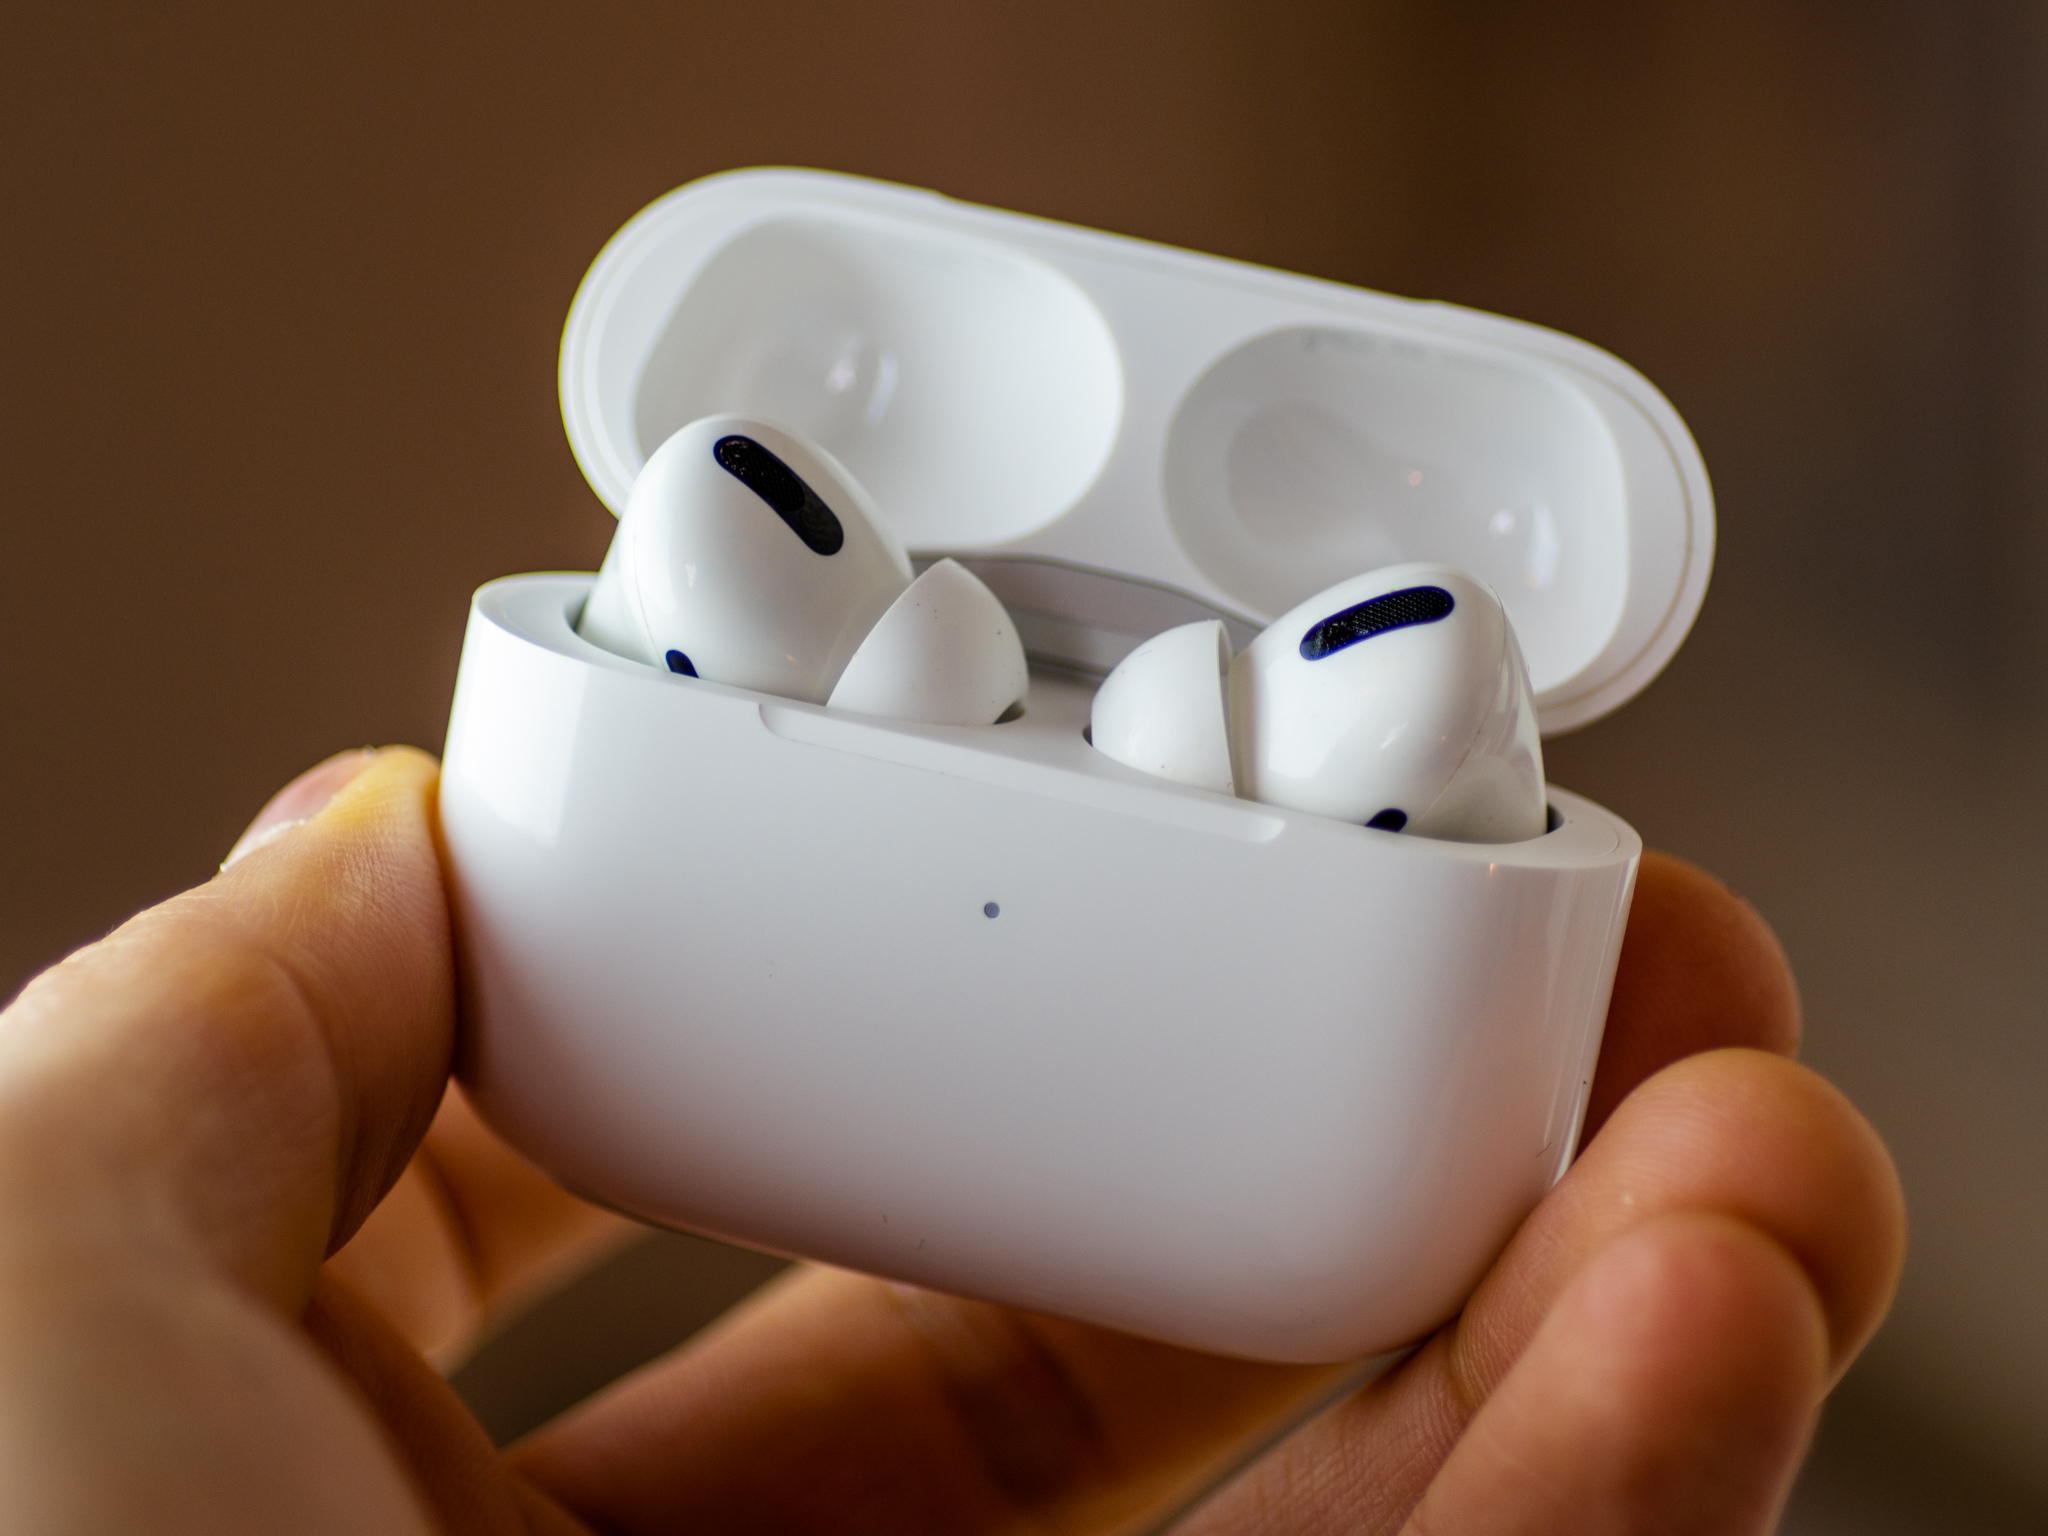 AirPods Pro are now available with the new MagSafe Charging Case - KARKEY